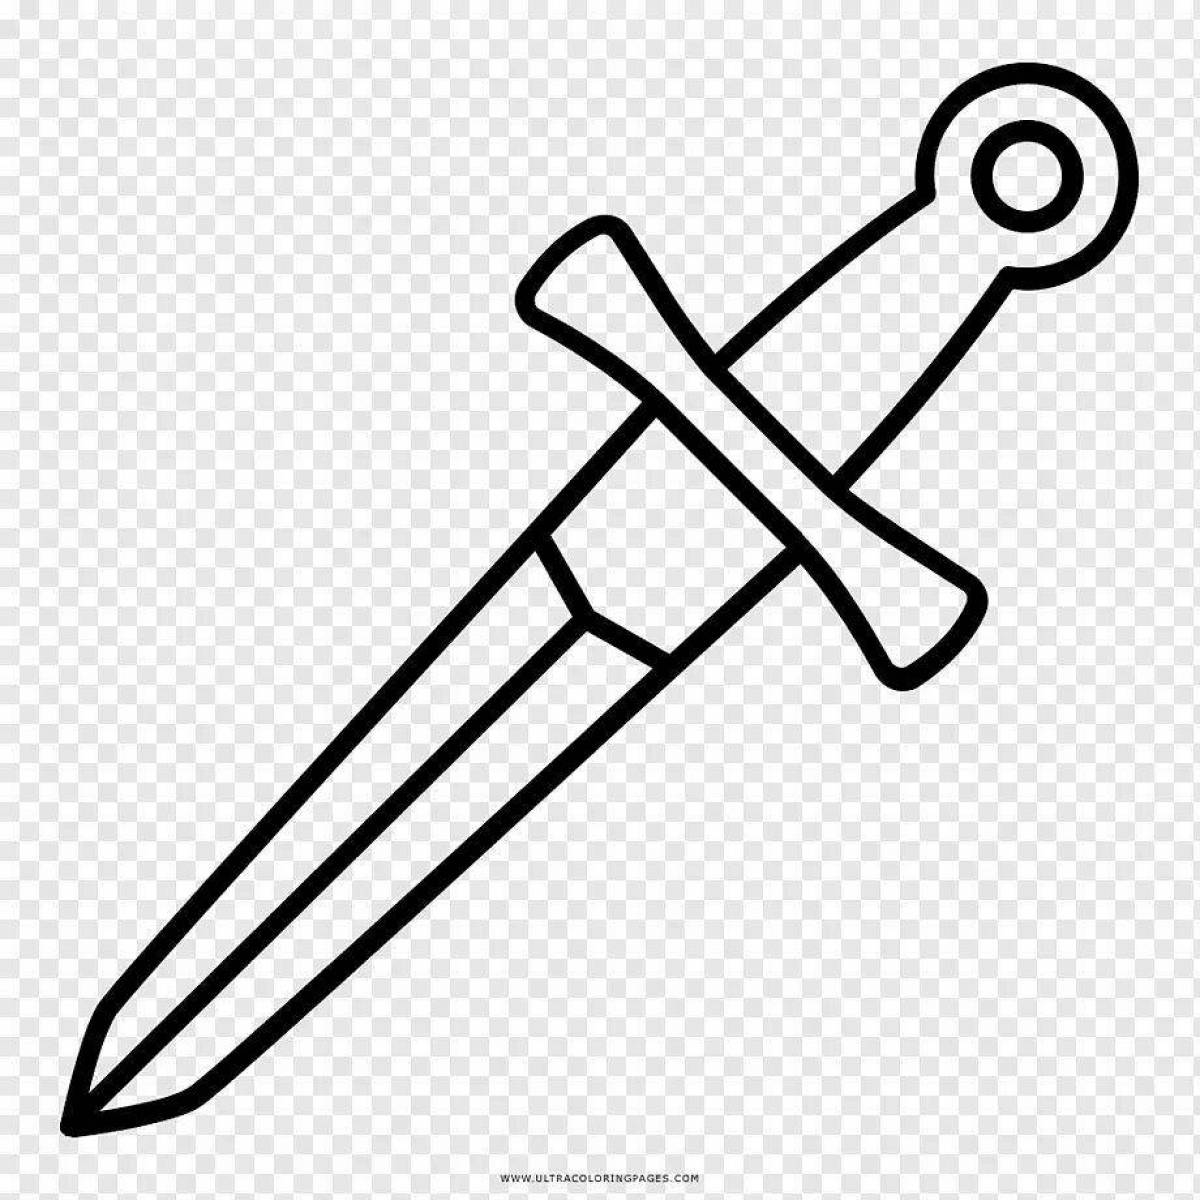 Coloring page stylish dagger